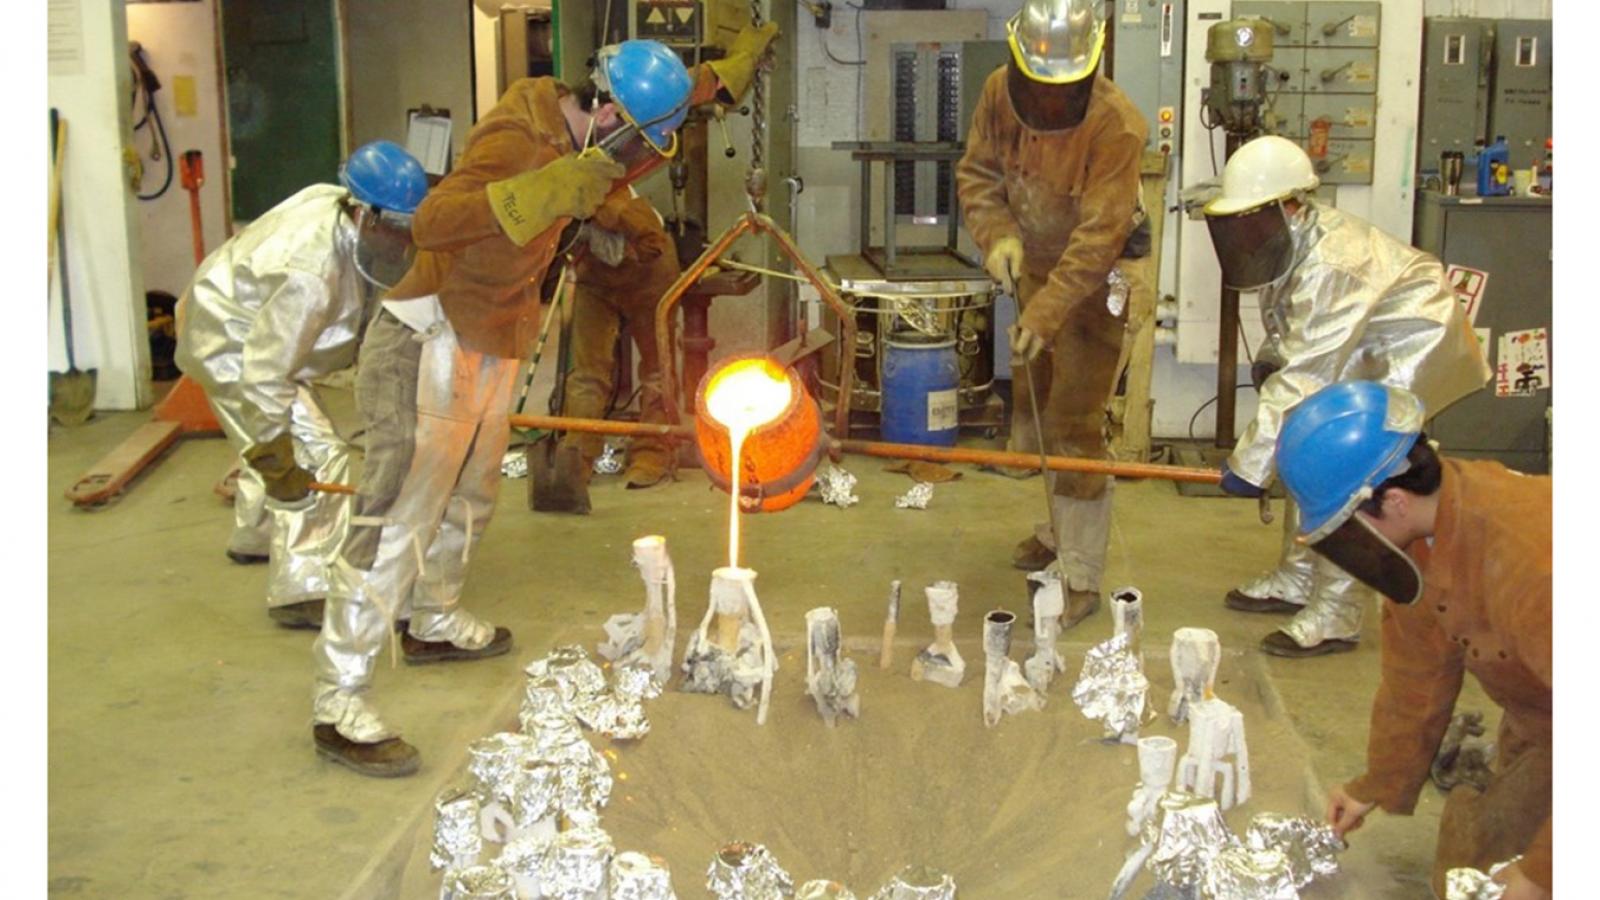 Students working with hot metal